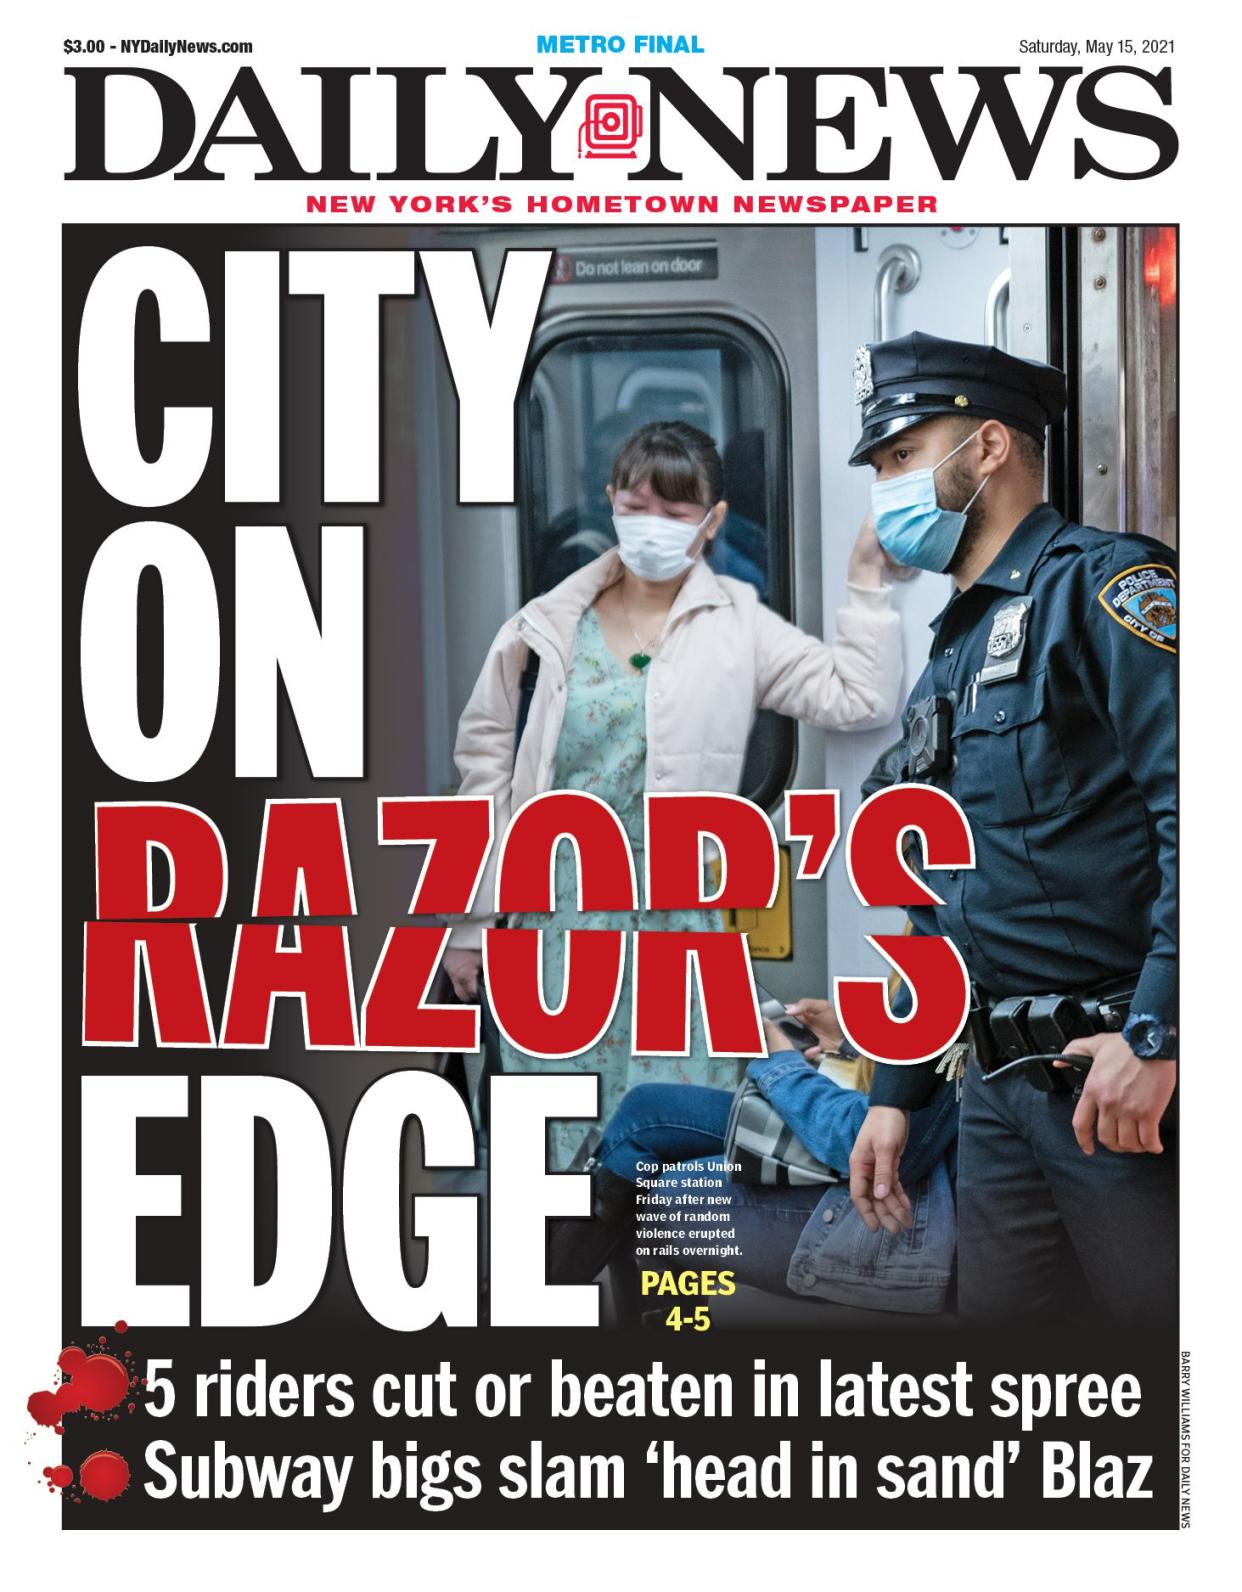 May 15, 2021: 5 riders cut or beaten in latest spree. Subway bigs slam "head in sand" Blaz. Cop patrols Union Square station Friday after new wave of random violence erupted on rails overnight.